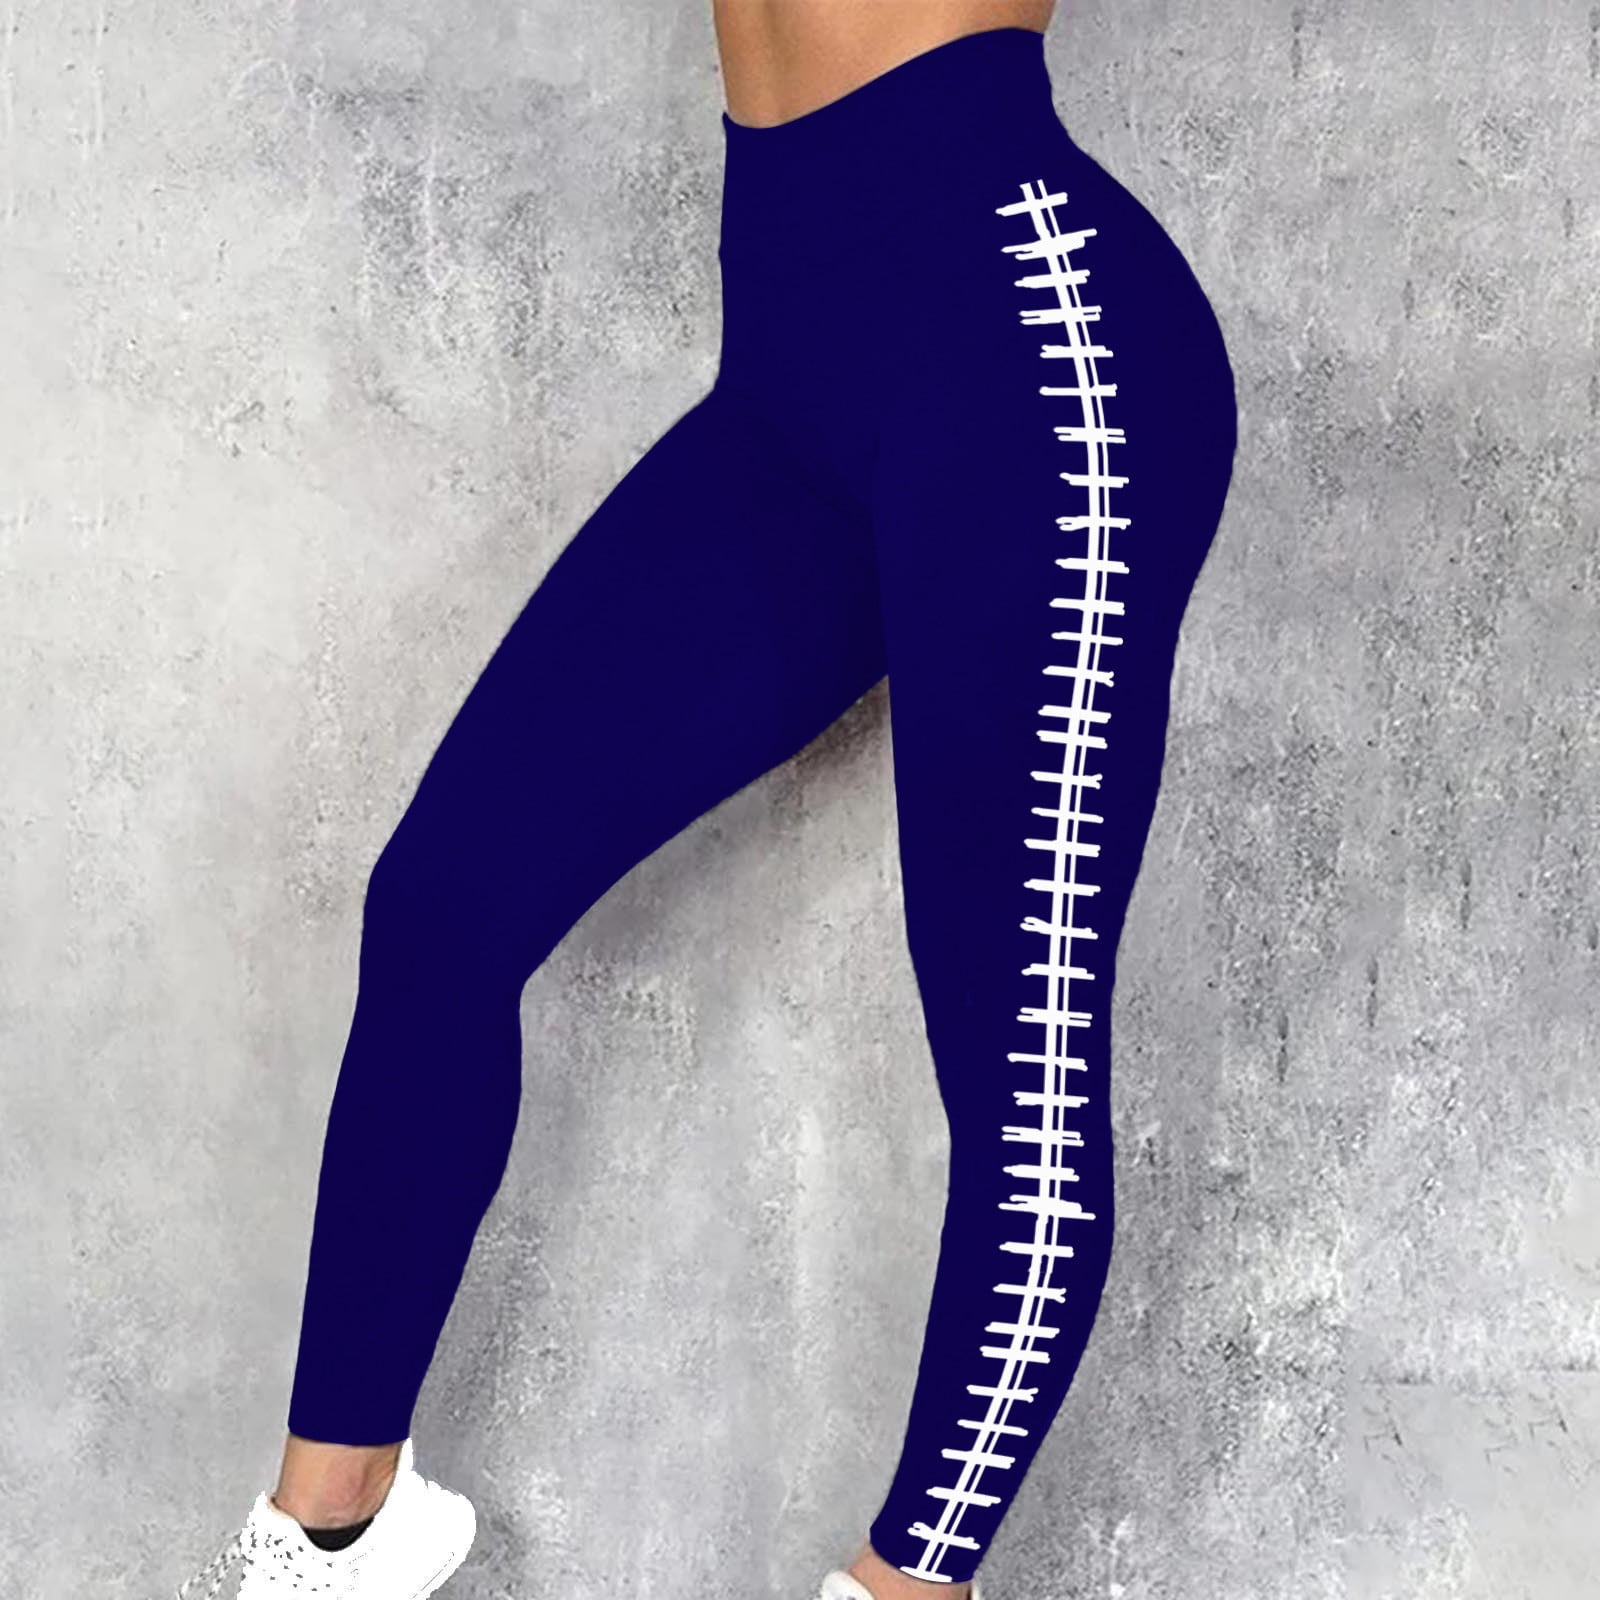 Yoga Pants Leggings For Women High Waist Tummy Control Compression For  Workout Jogging Cycling Table Tennis Volleyball Tennis